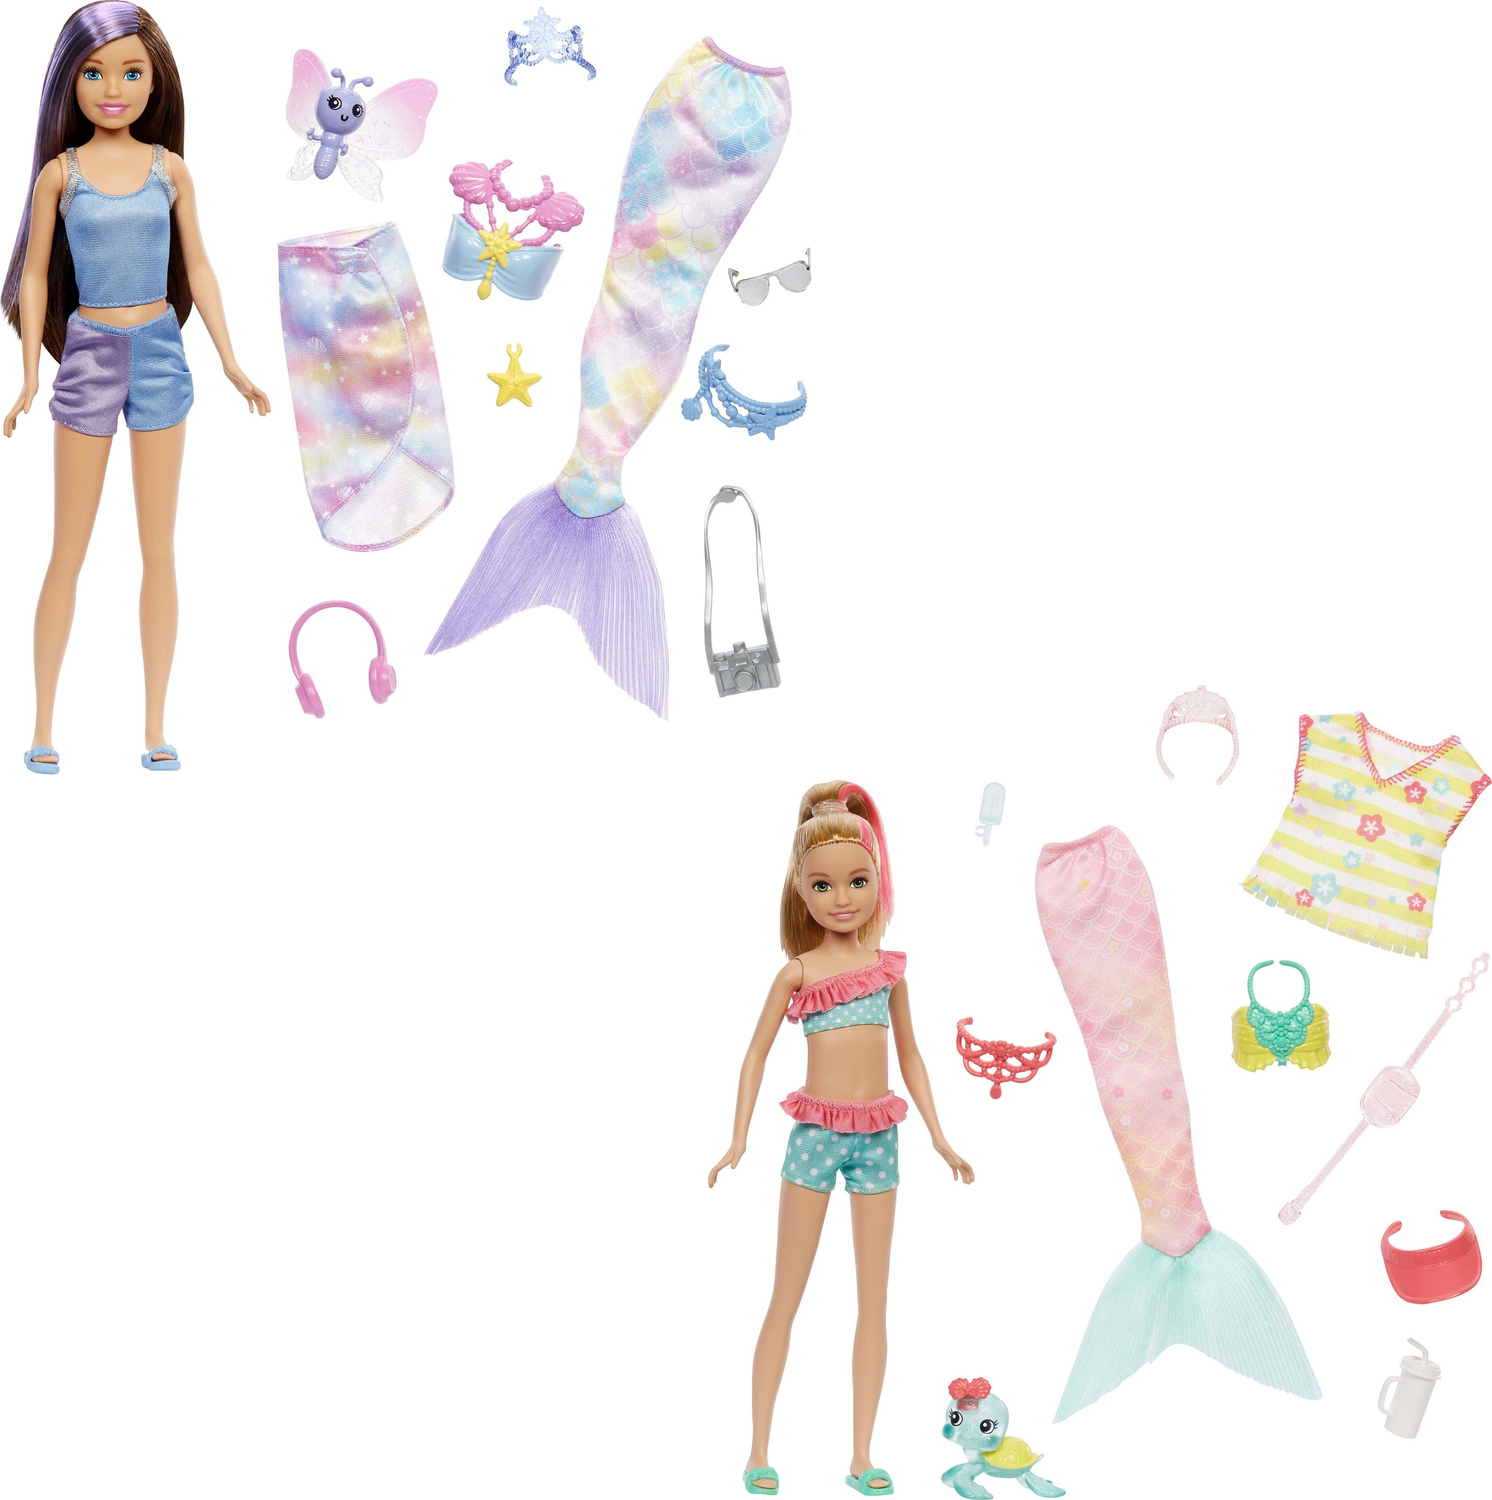 Barbie Mermaid Power Dolls, Fashions And Accessories - The Toy